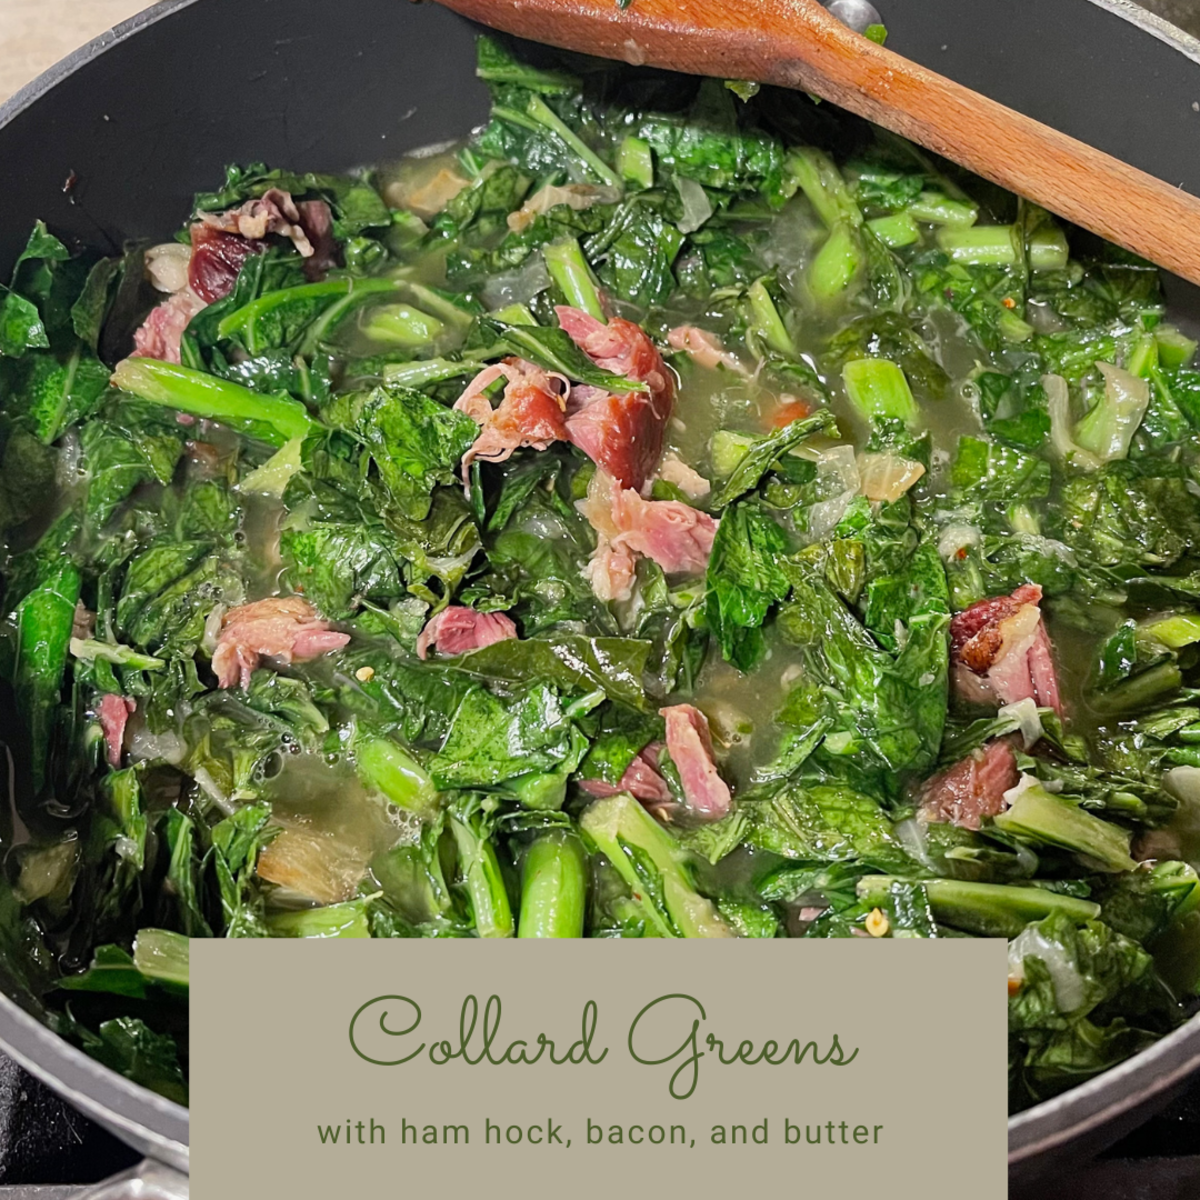 Traditional Southern collard greens cooked with ham hocks, bacon drippings, and butter